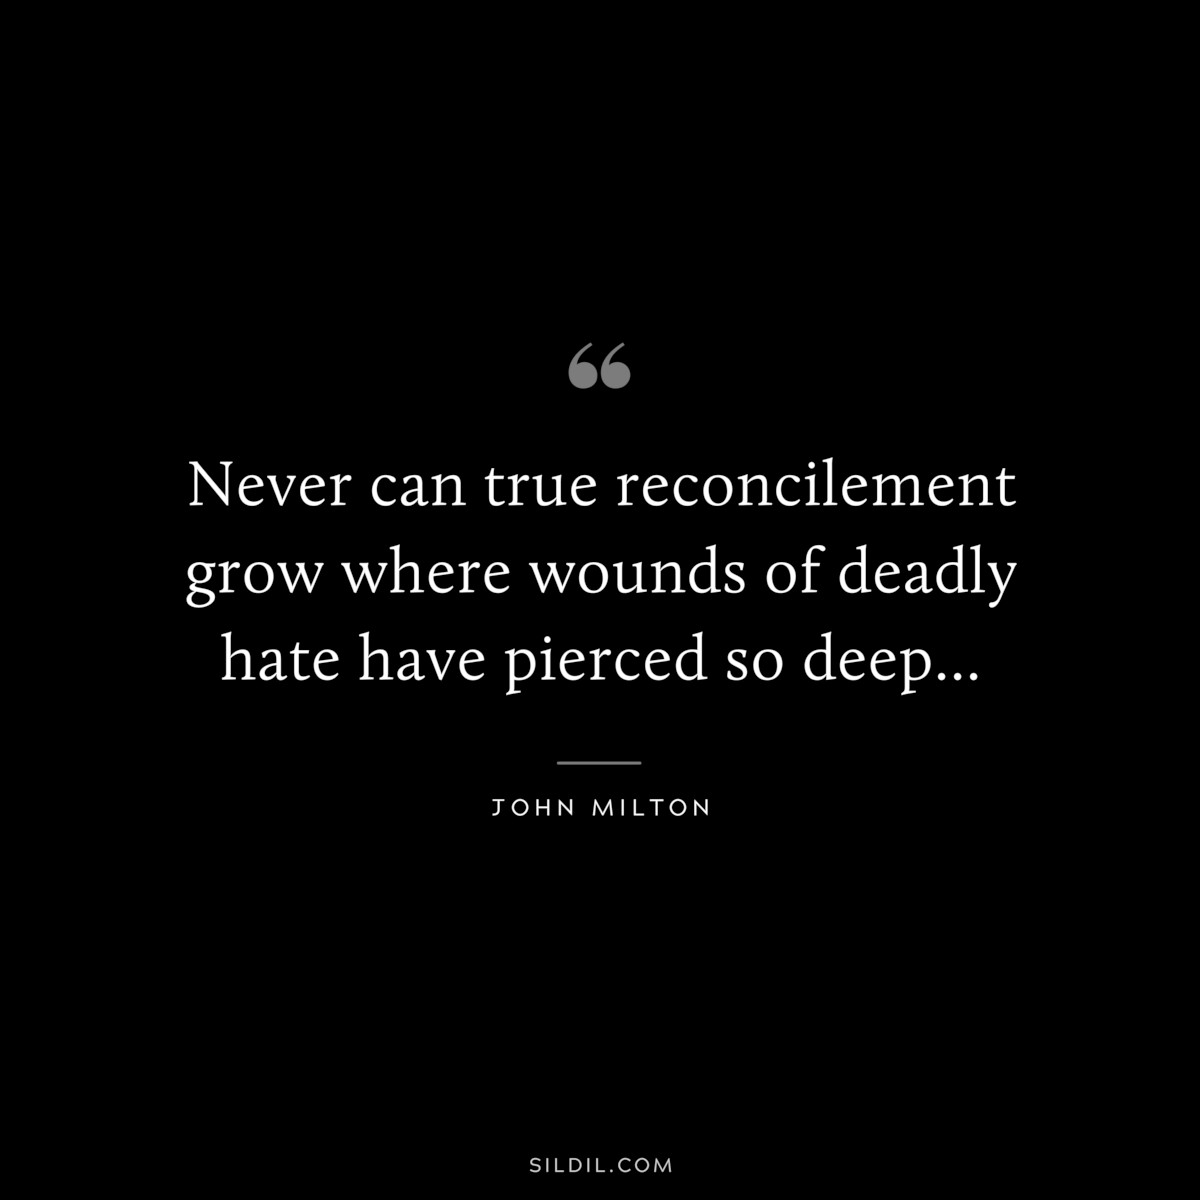 Never can true reconcilement grow where wounds of deadly hate have pierced so deep... ― John Milton